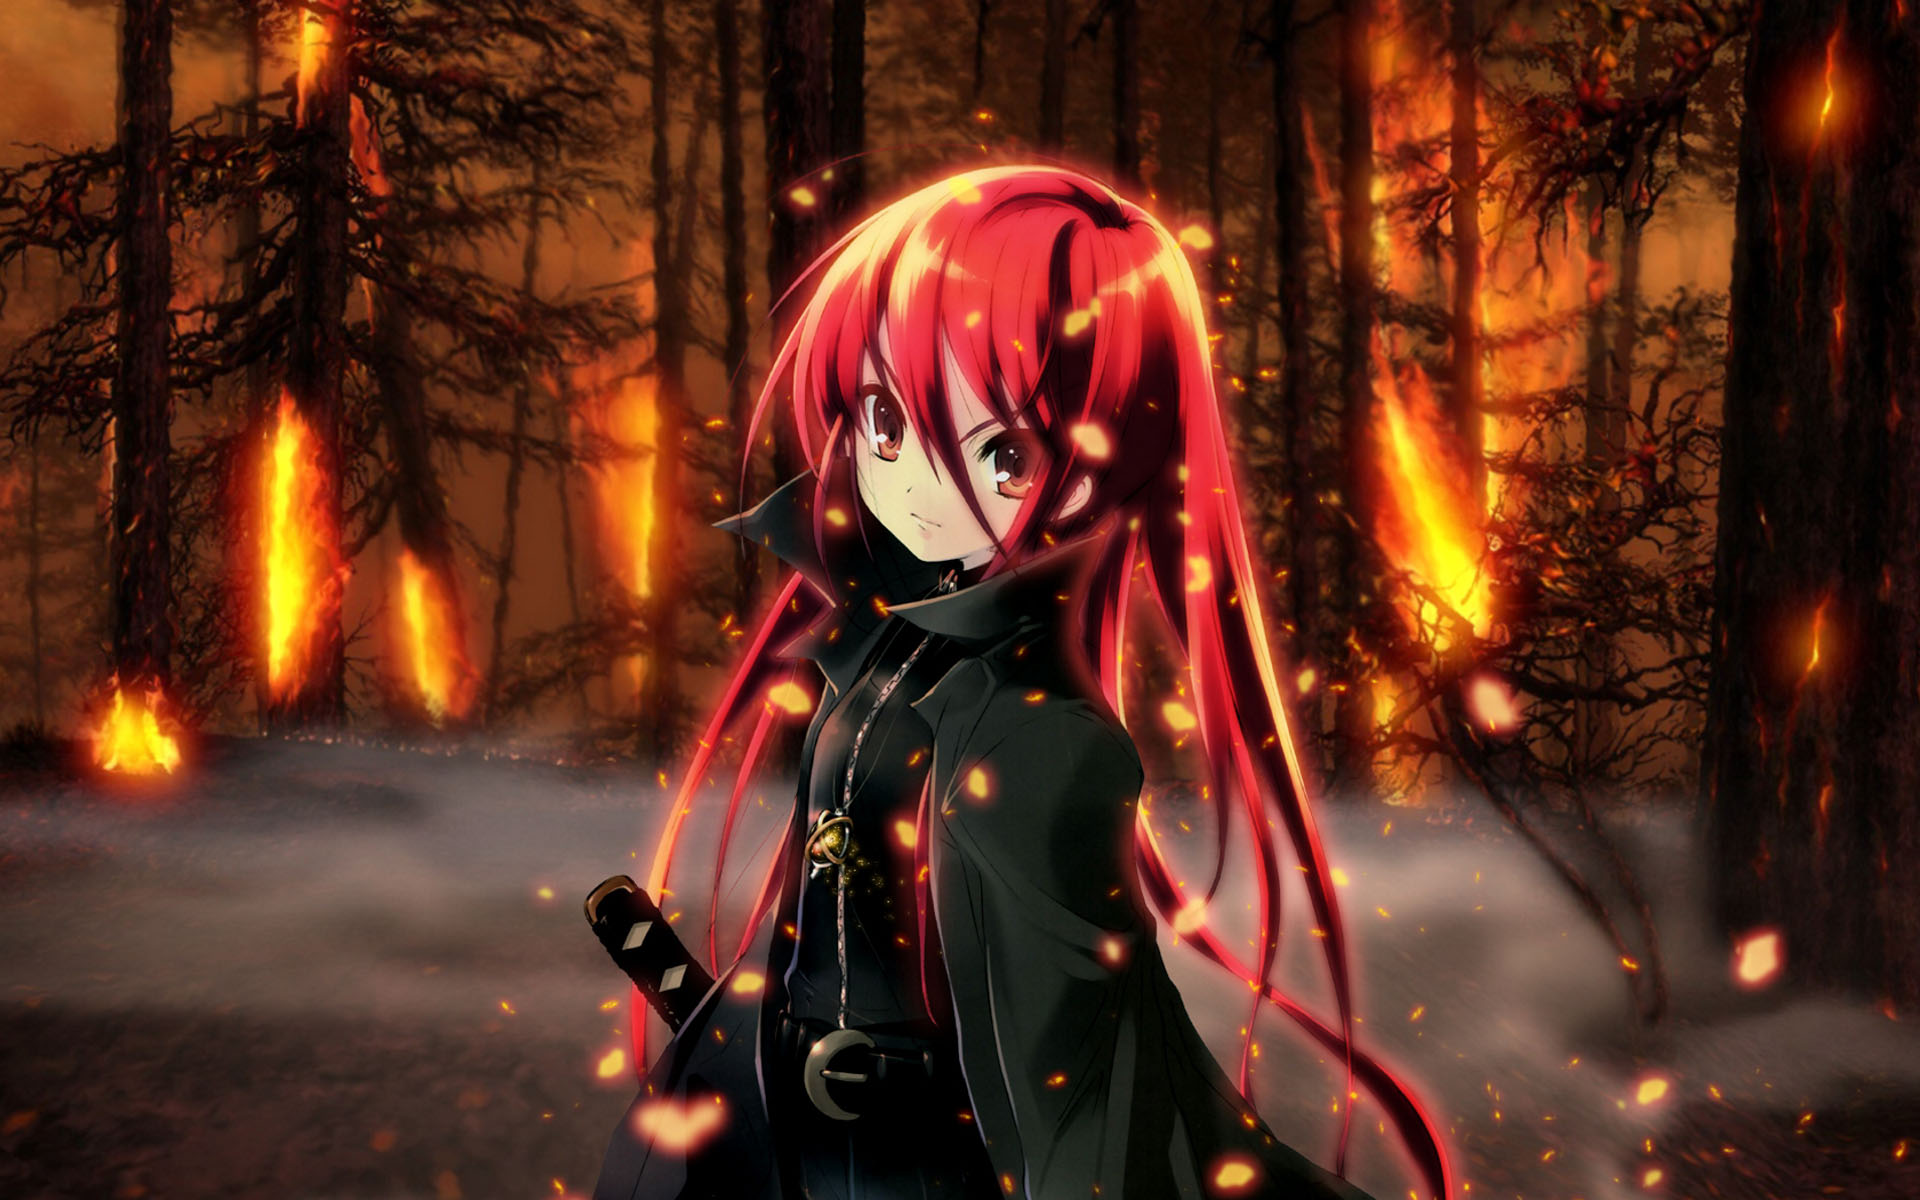 Image   Anime girl with red hair and a sword wallpaper 3553jpg   Camp 1920x1200